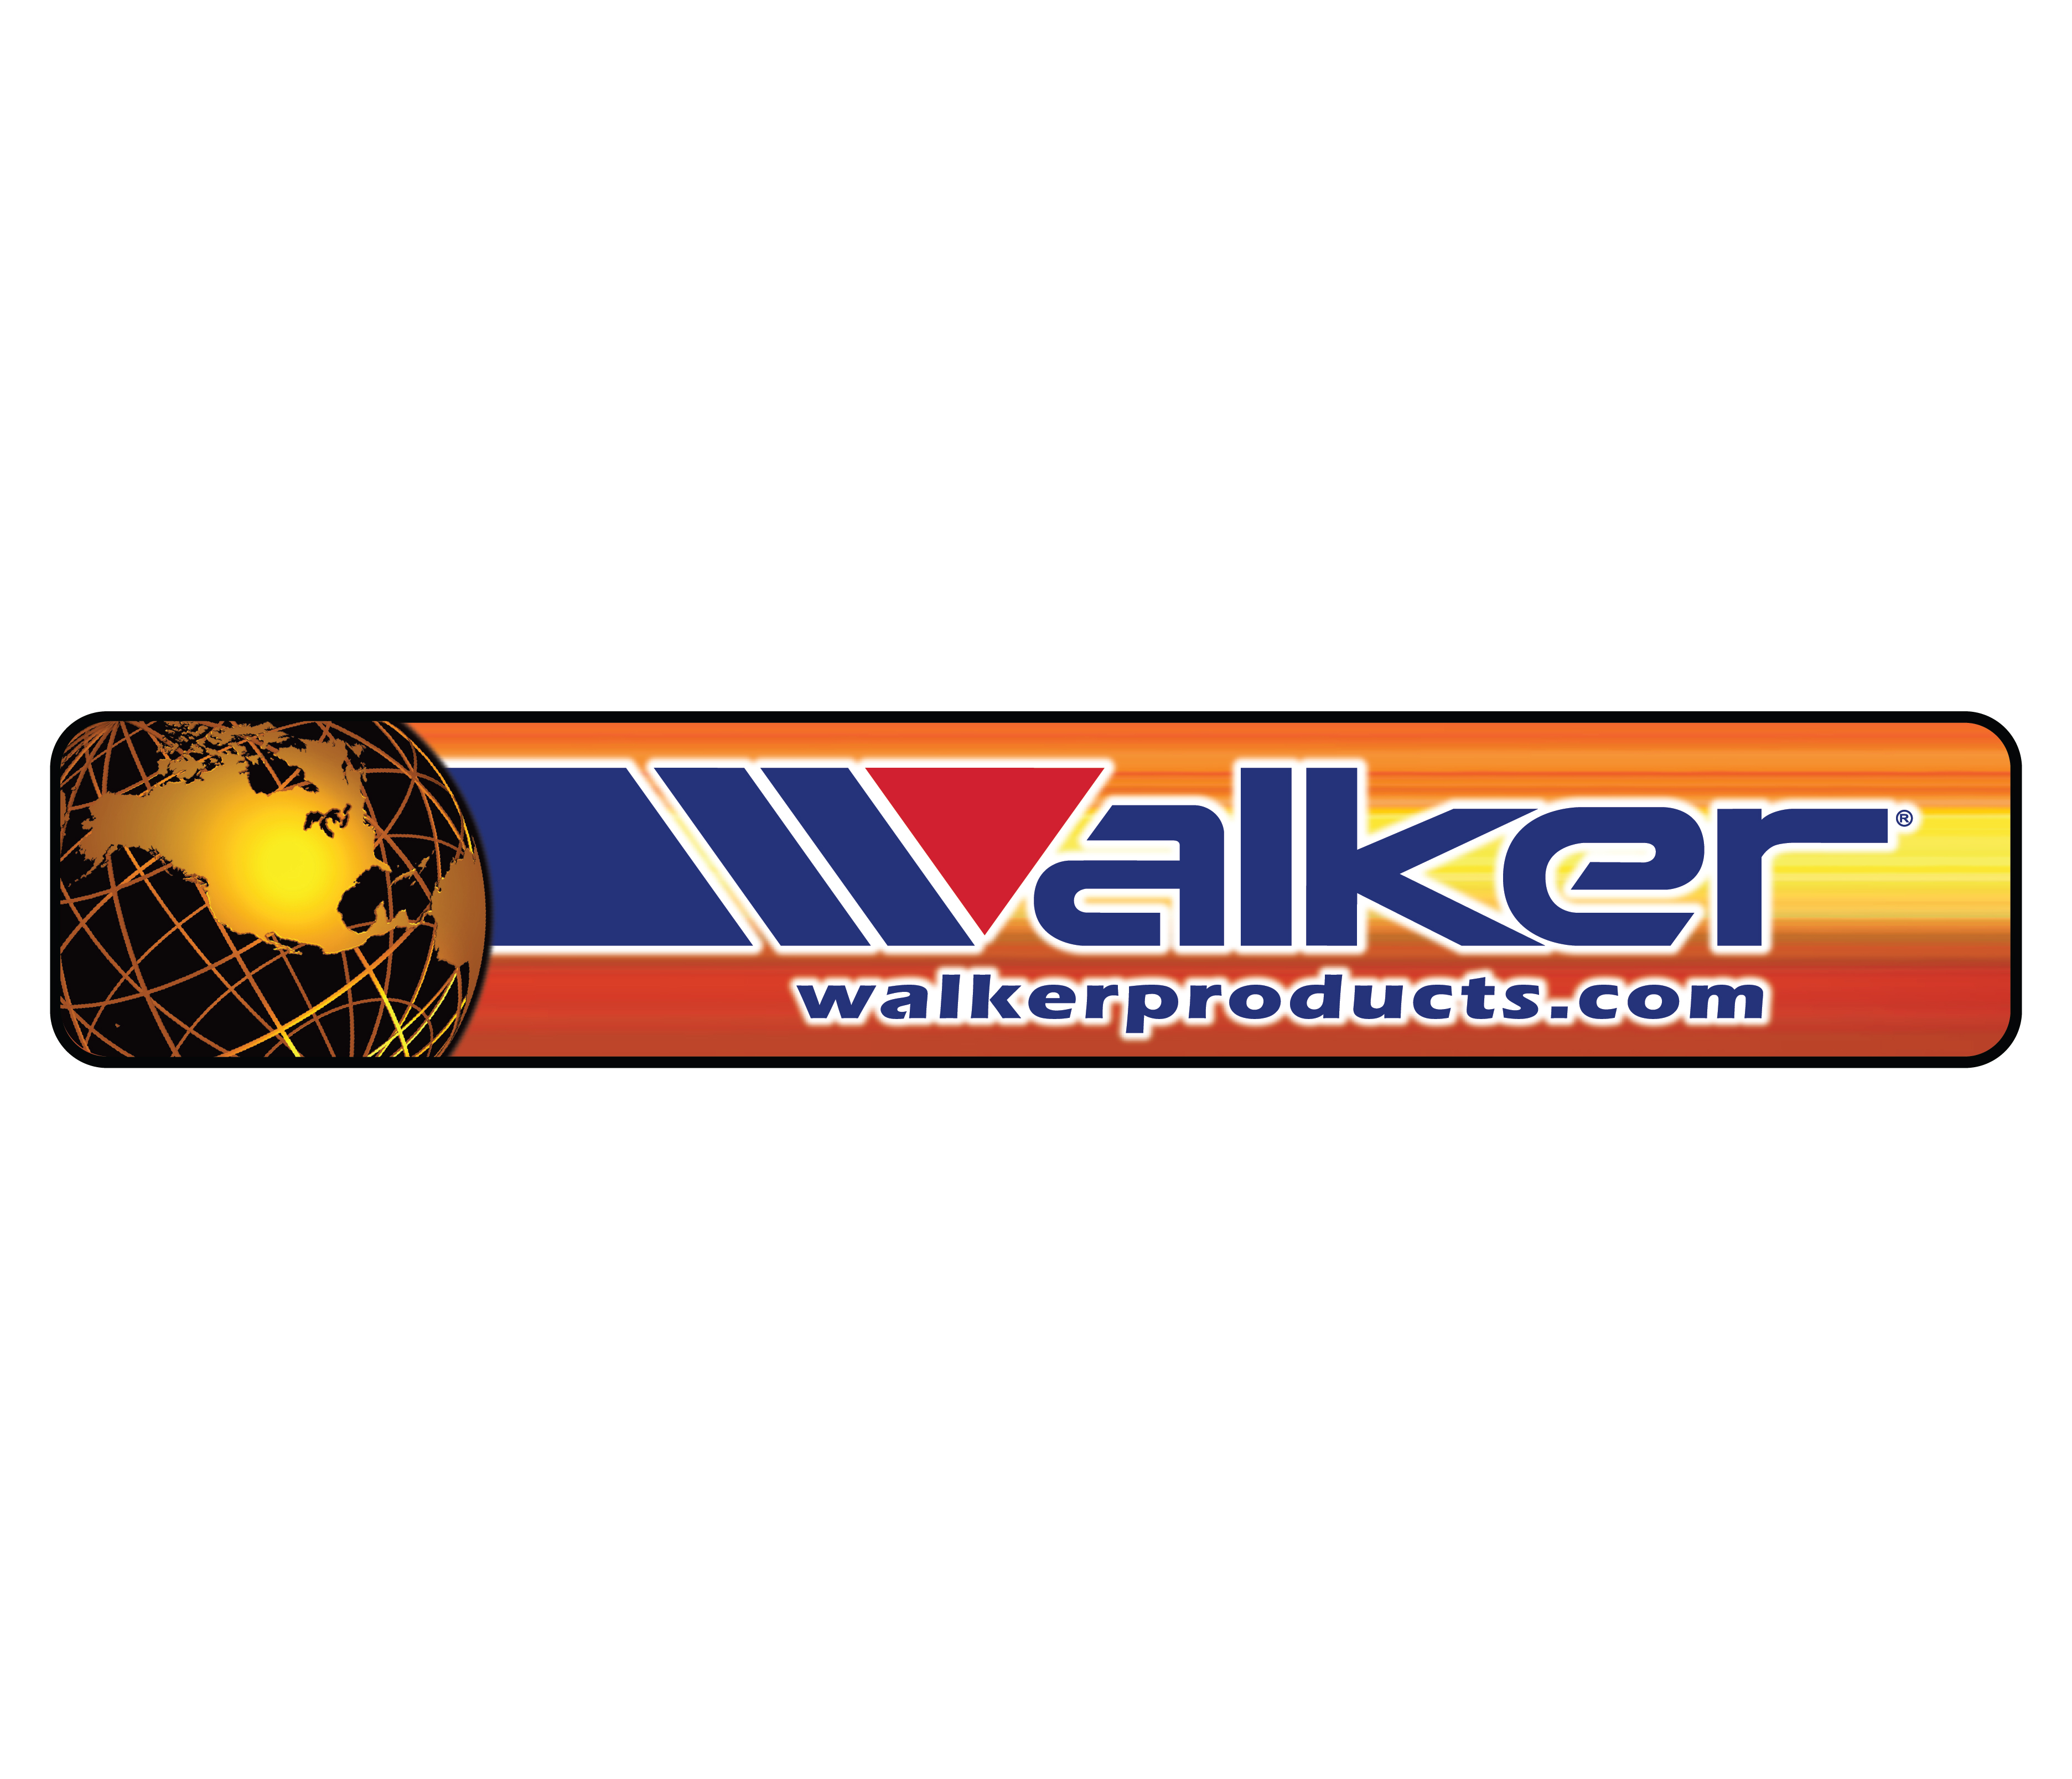 WALKER PRODUCTS, INC.